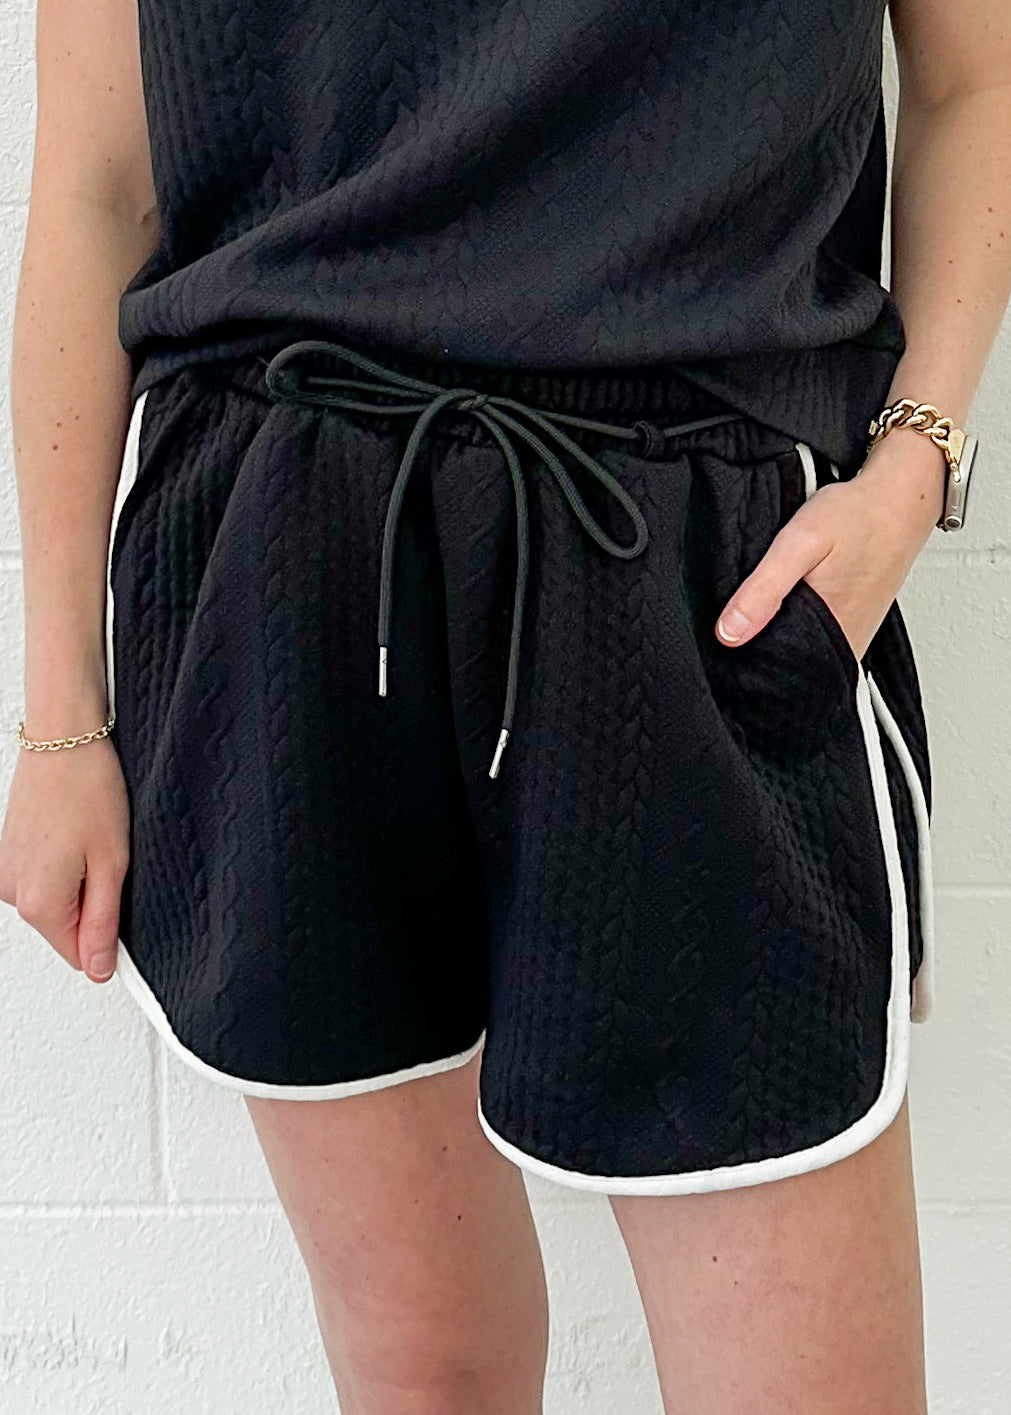 On The Courts Black And White Shorts